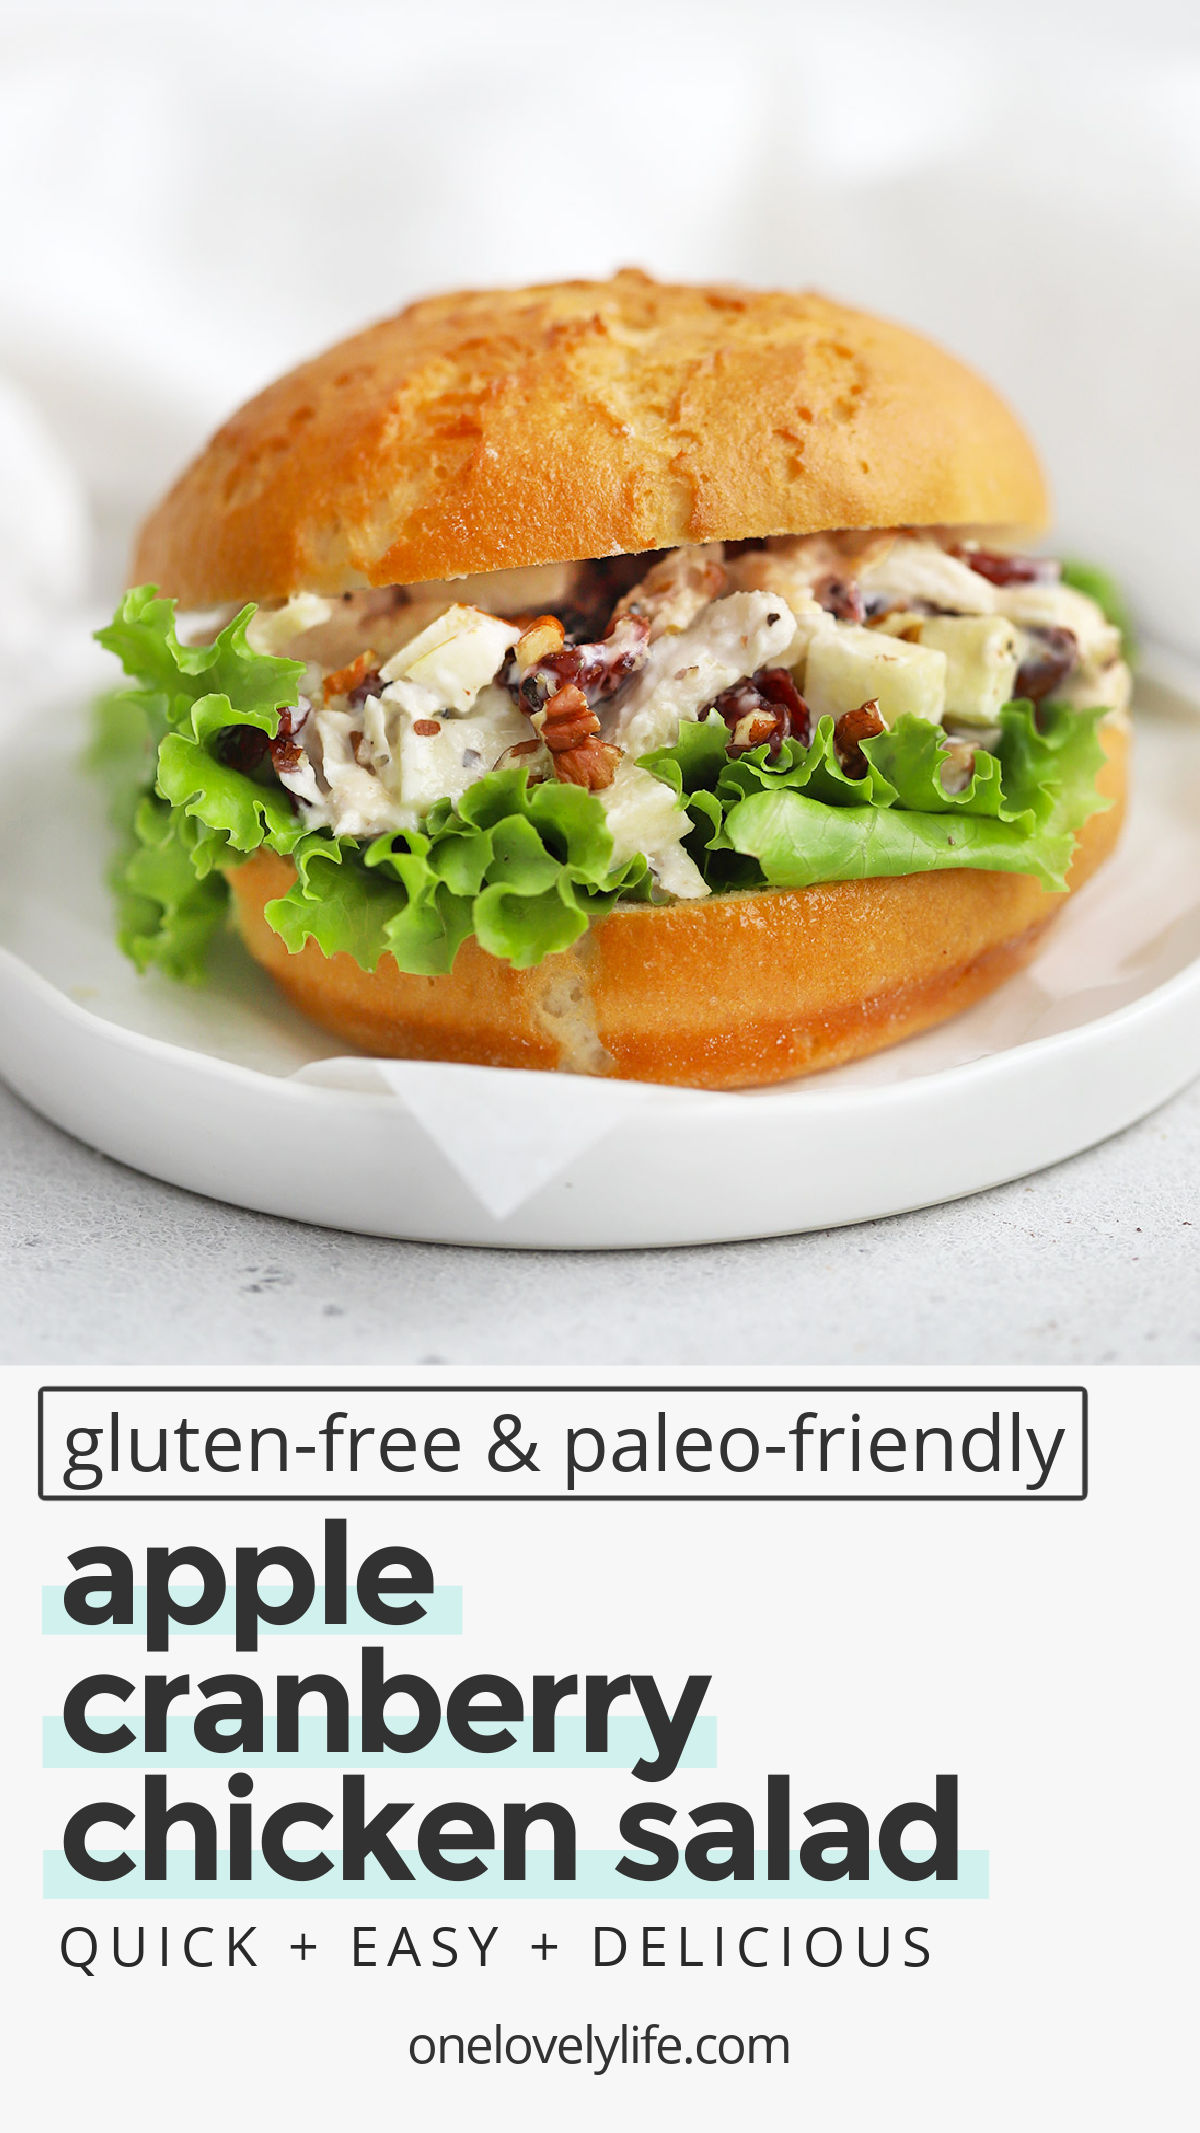 Apple Chicken Salad - This chicken salad with apples is perfect for the start of fall! It's the perfect combination of savory, sweet, creamy, and crunchy. Don't miss all our serving ideas below! (Gluten-Free, Paleo-Friendly) // Apple Chicken Salad // Pecan Chicken Salad // Cranberry Pecan Chicken Salad // Fall Chicken Salad #glutenfree #paleo #chickensalad #mealprep